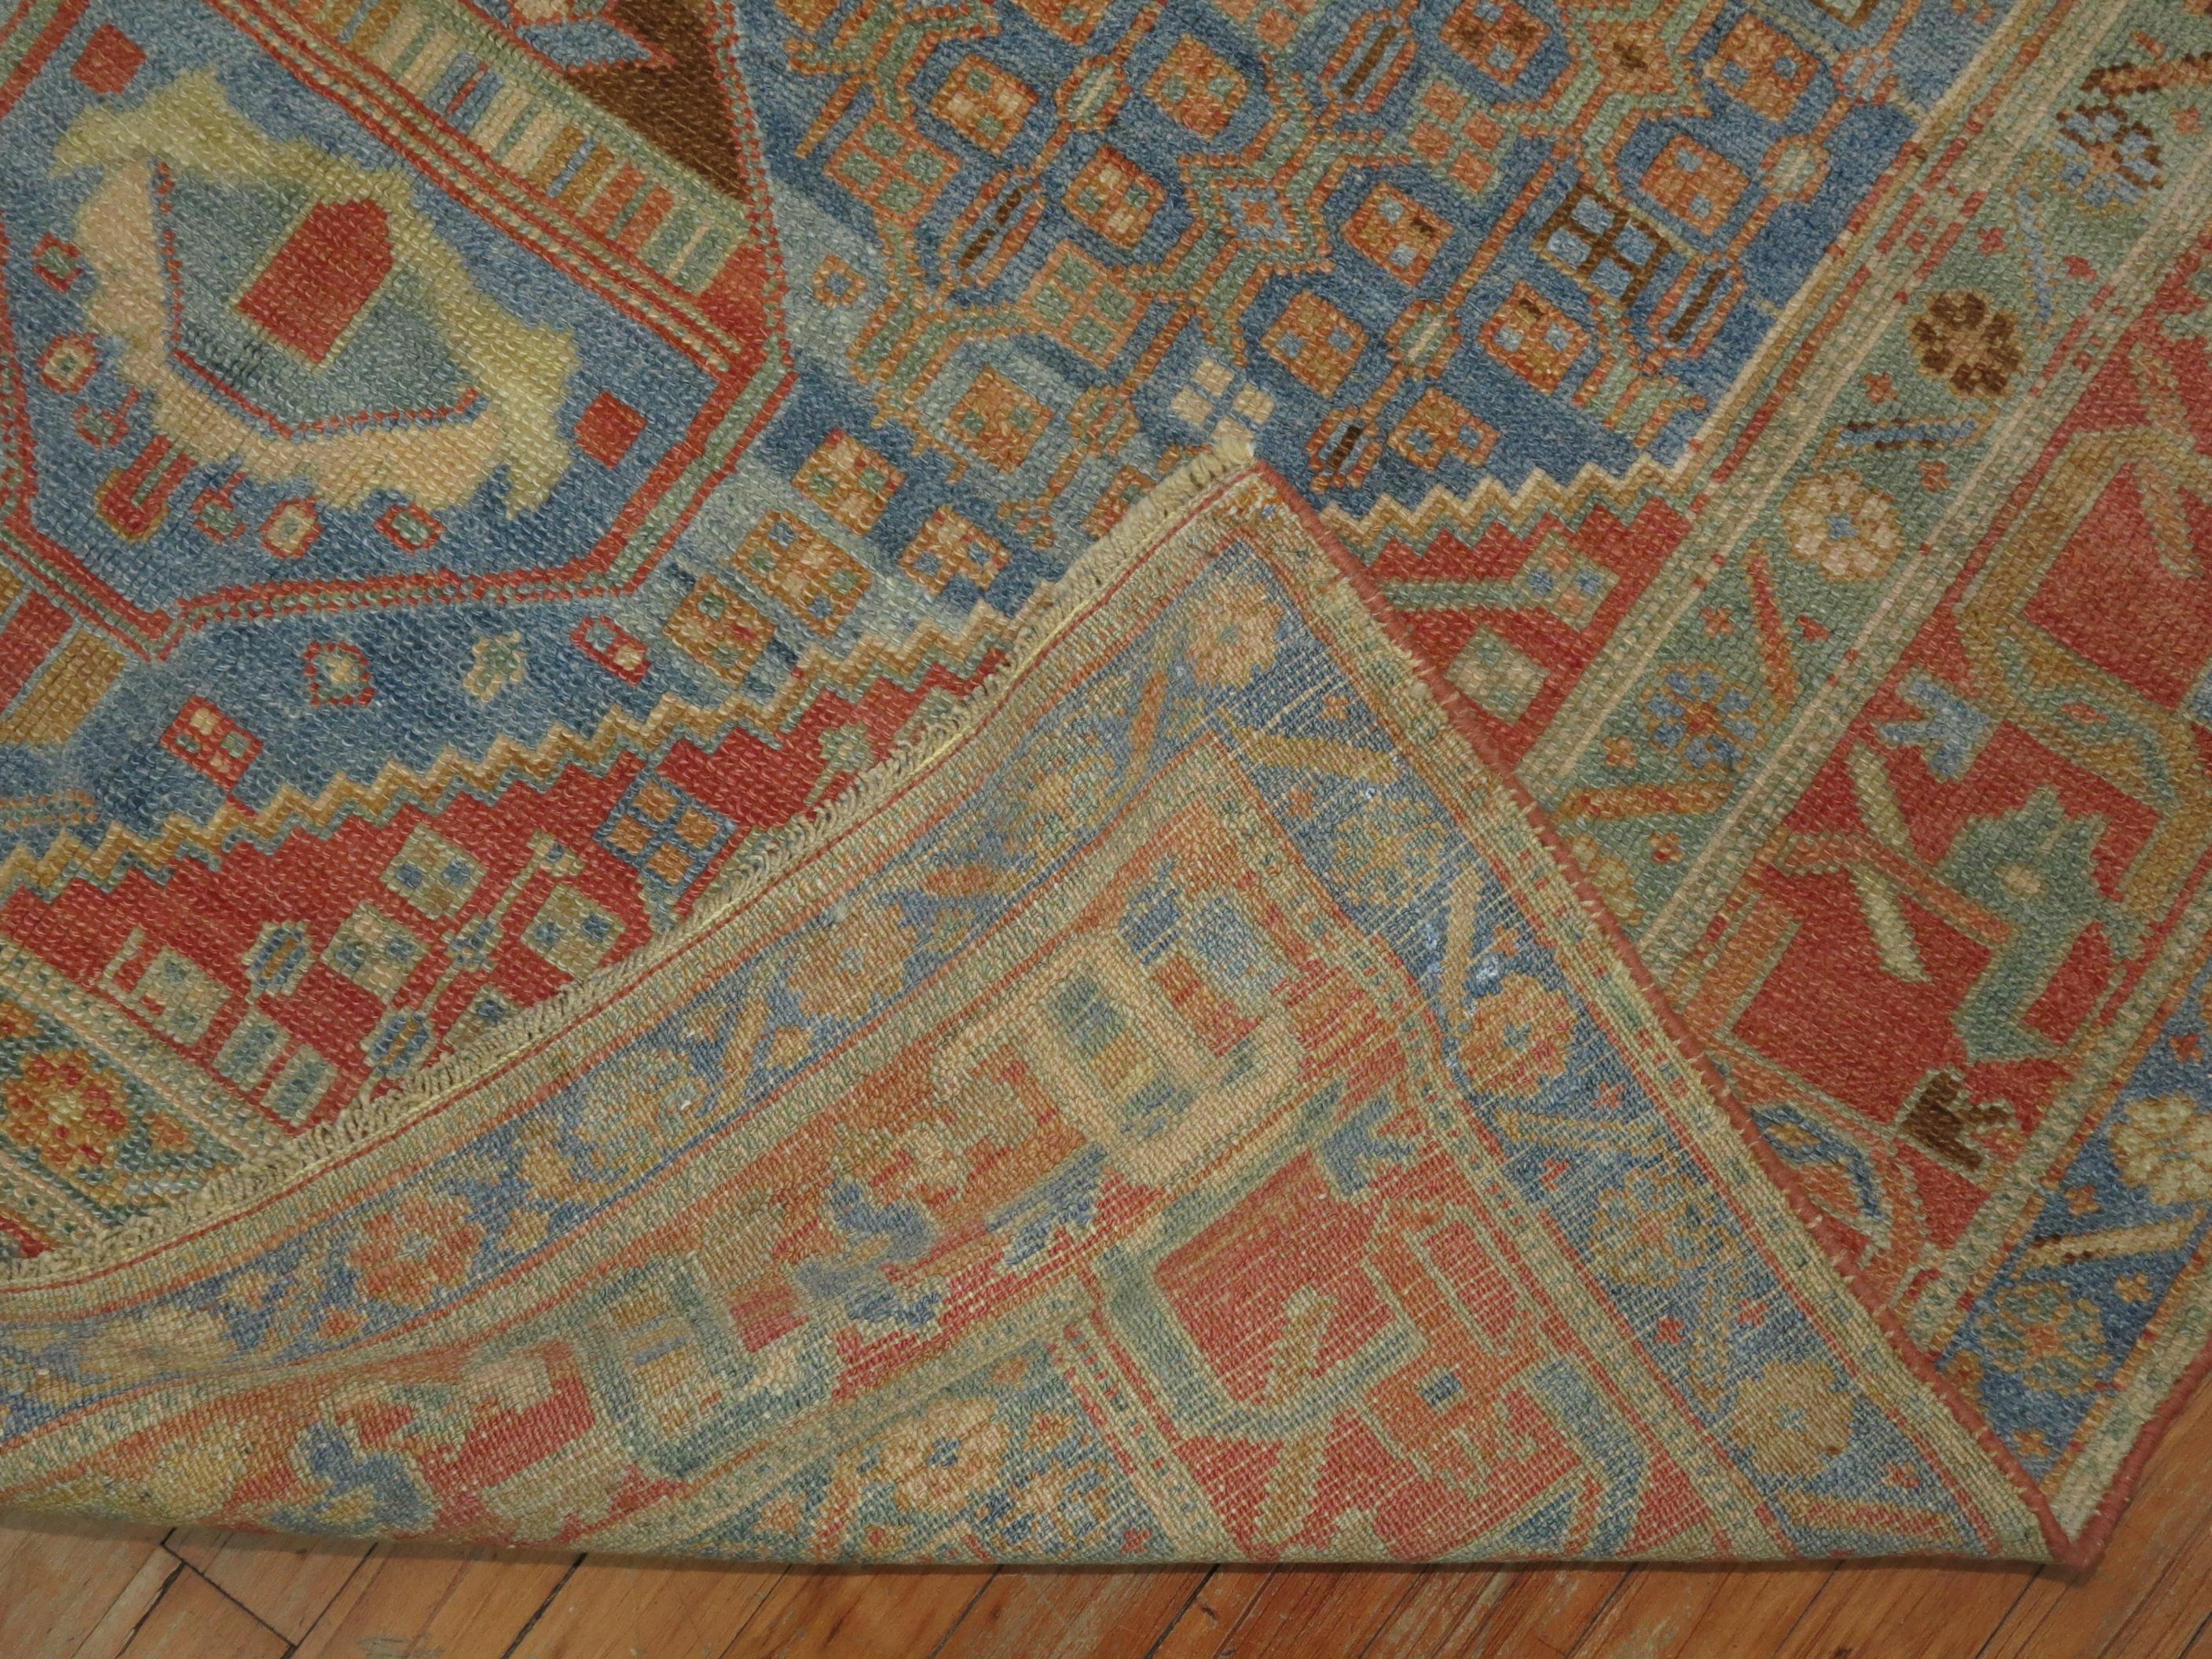 Highly decorative antique early 20th century Persian Malayer rug. Predominant shades in blue and terracotta.
  
 